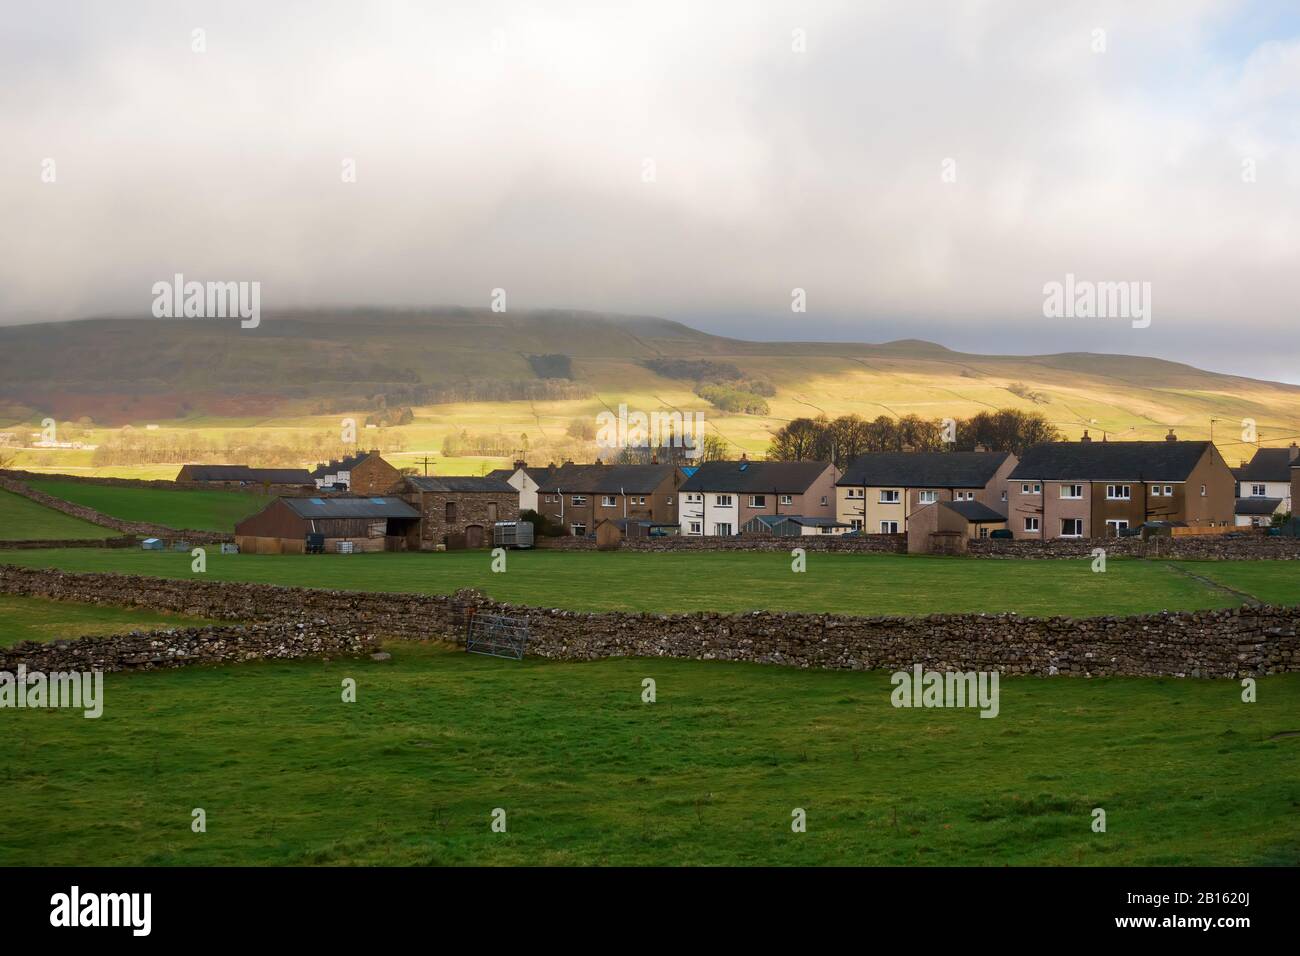 The village of Gayle and Abbotside Common, Wensleydale, Yorkshire Dales Stock Photo